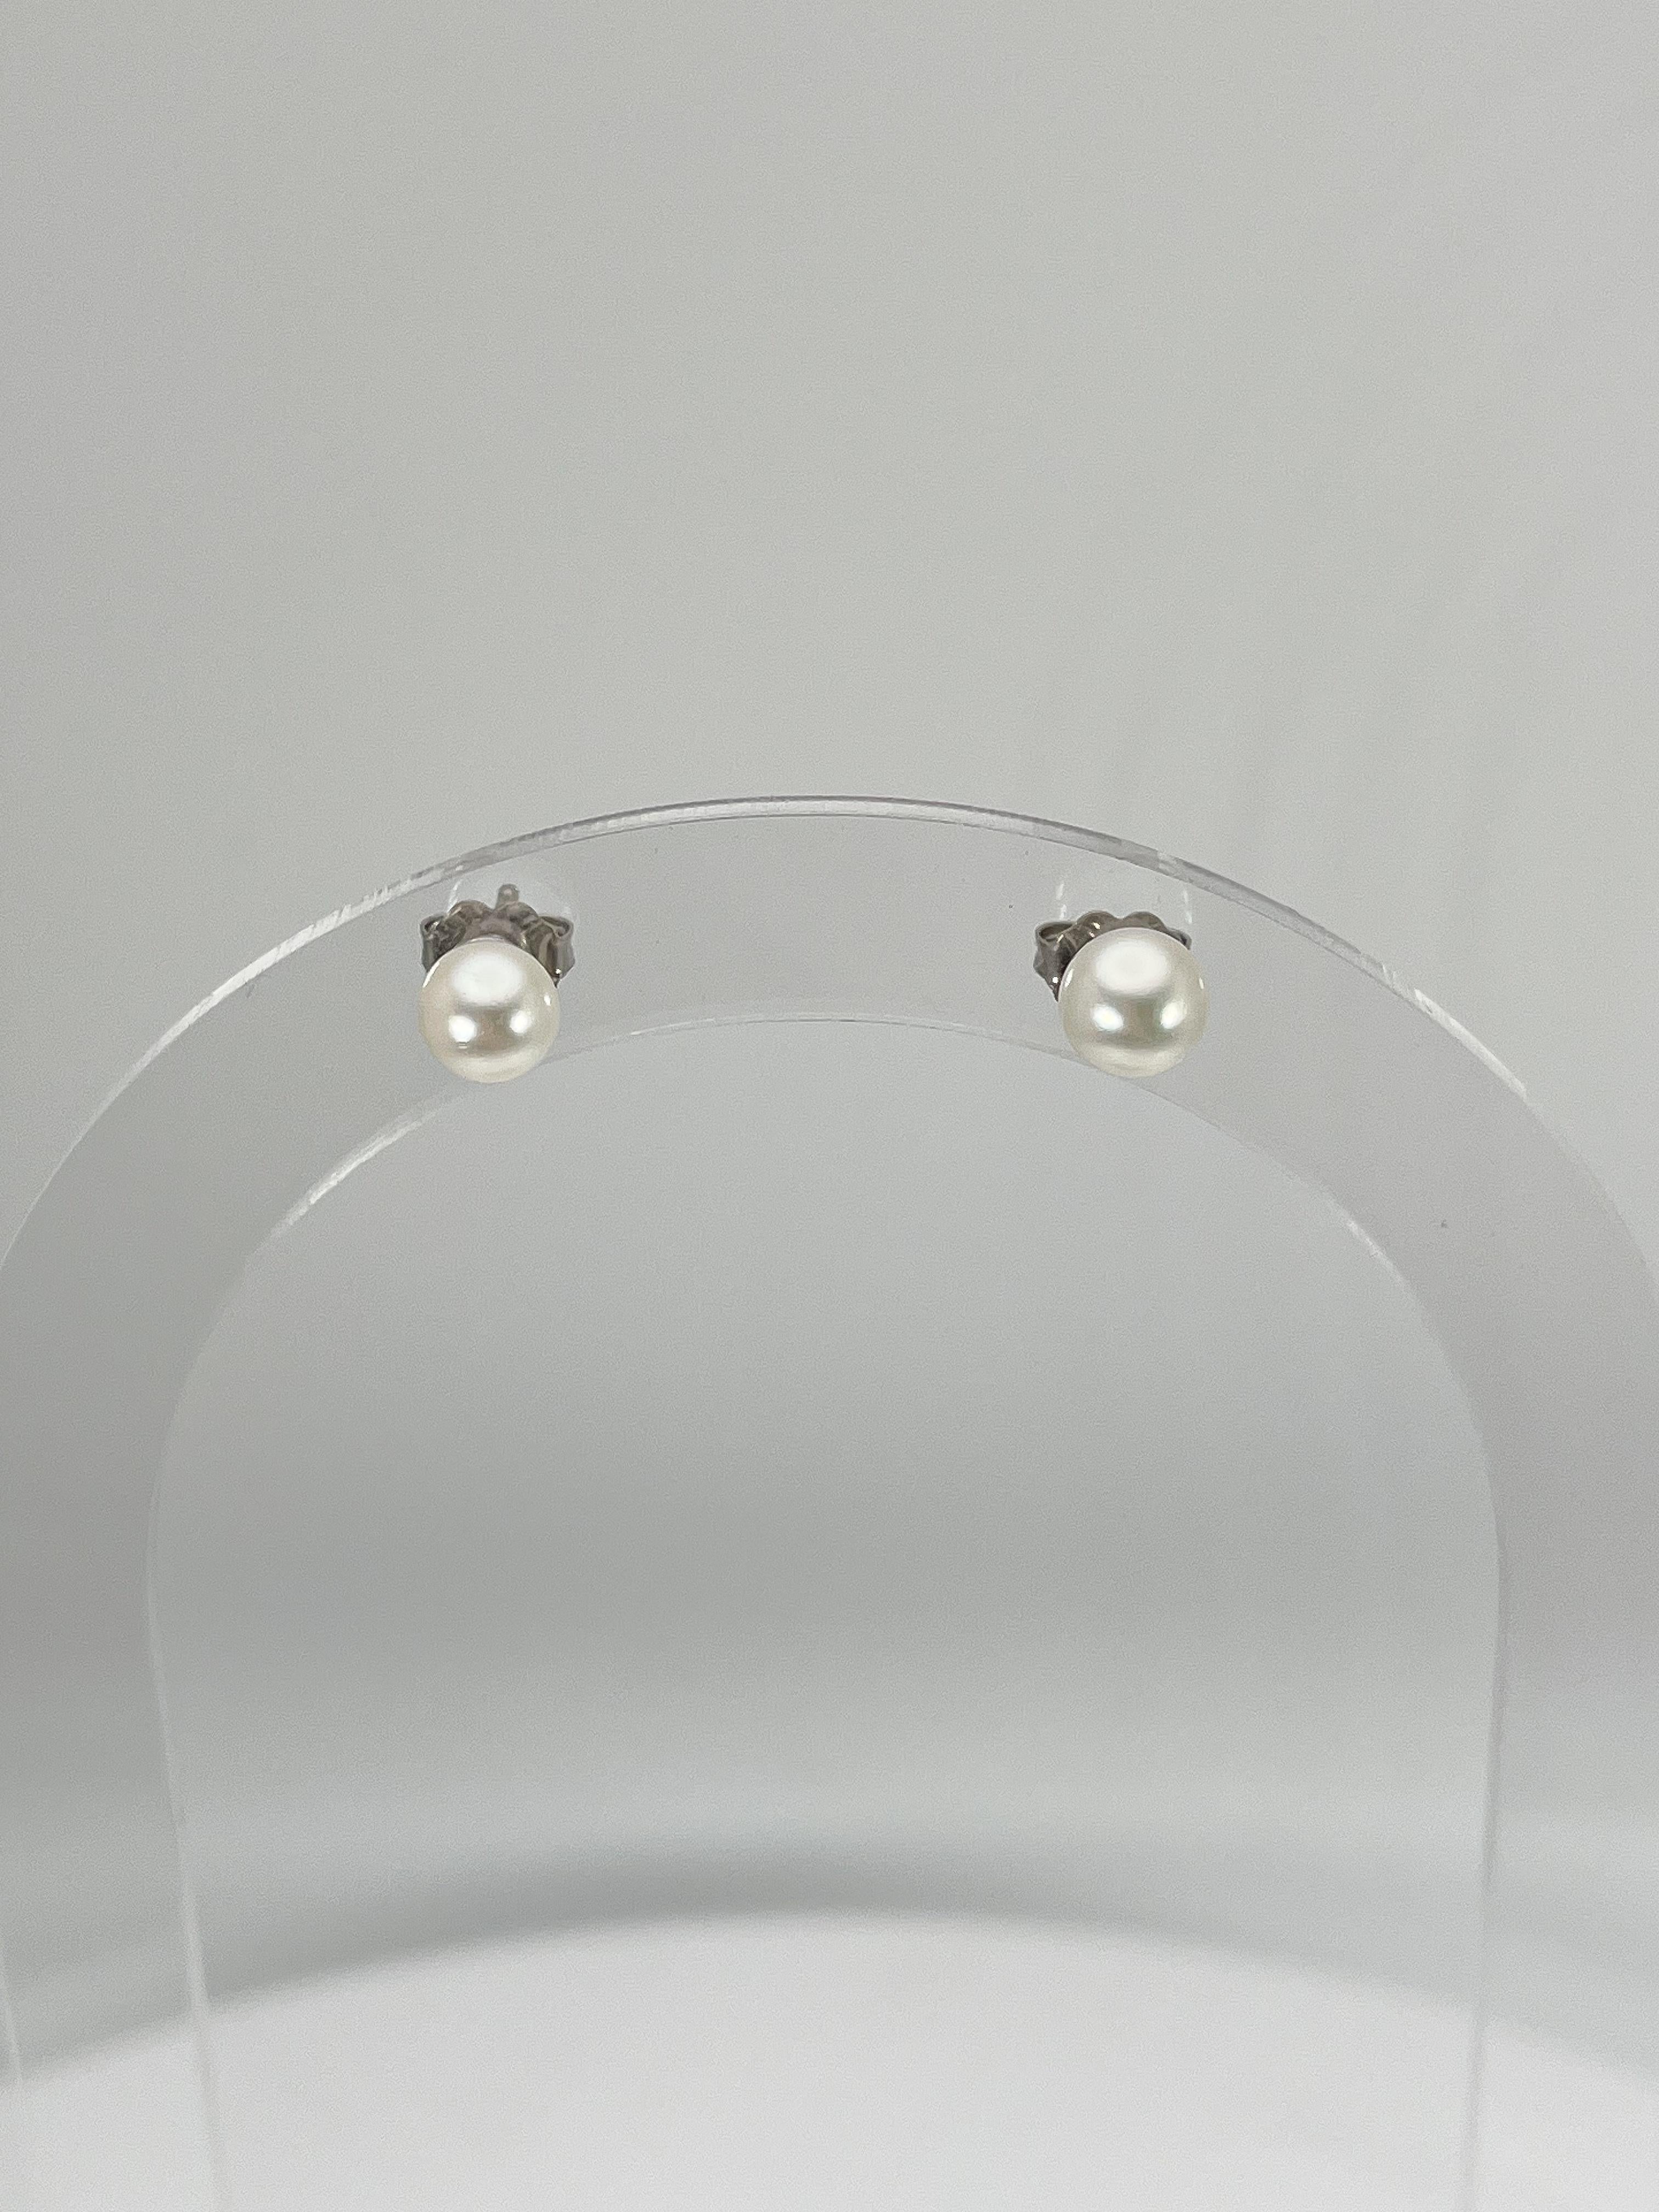 14k white gold 6mm white pearl stud earrings. These earrings have a total weight of 1.26 grams.